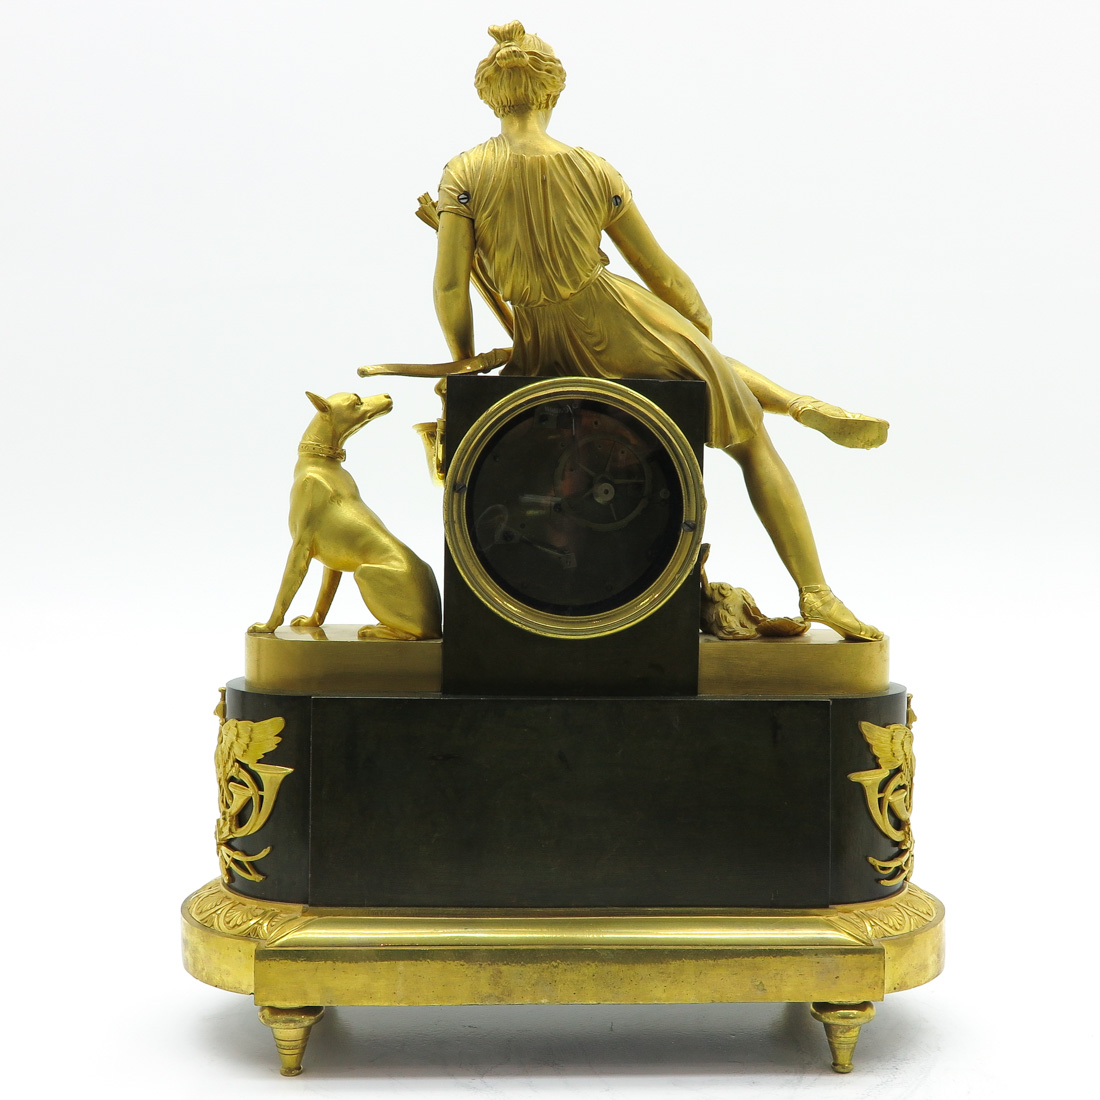 French Pendule Circa 1790 Signed Vaillant a Paris - Image 3 of 7